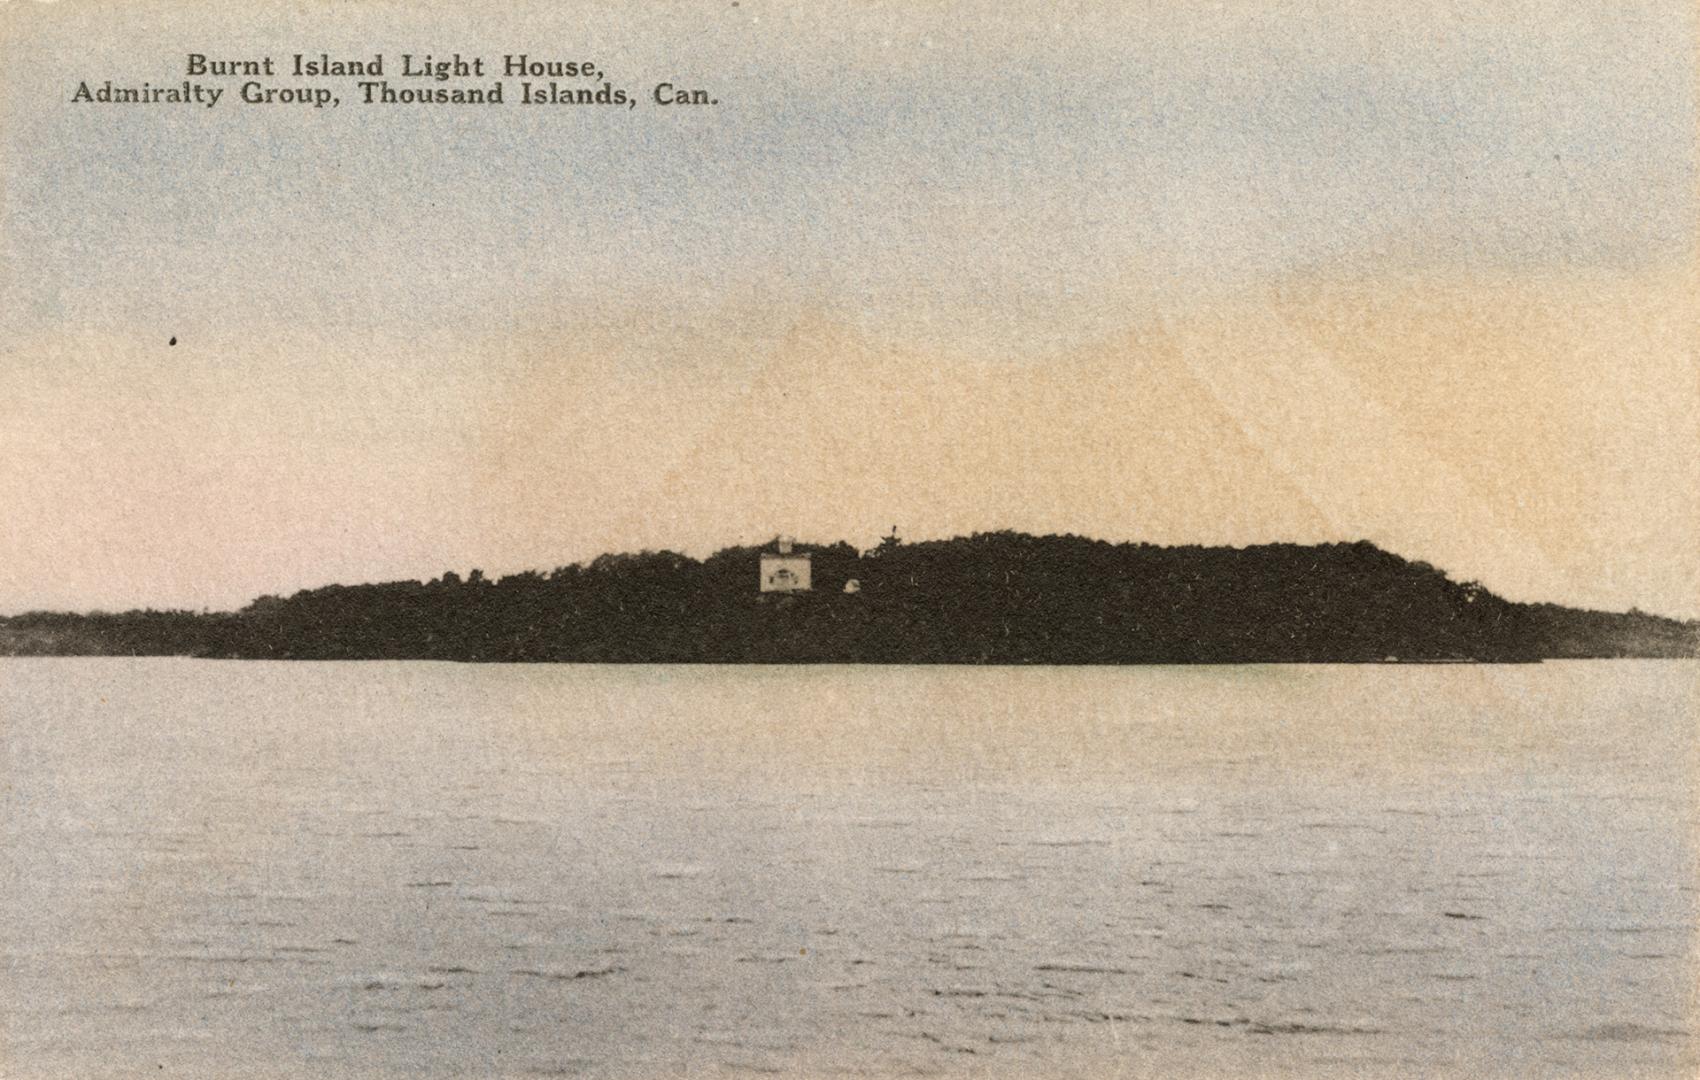 Colorized photograph of a small structure on an island in the middle of a river.